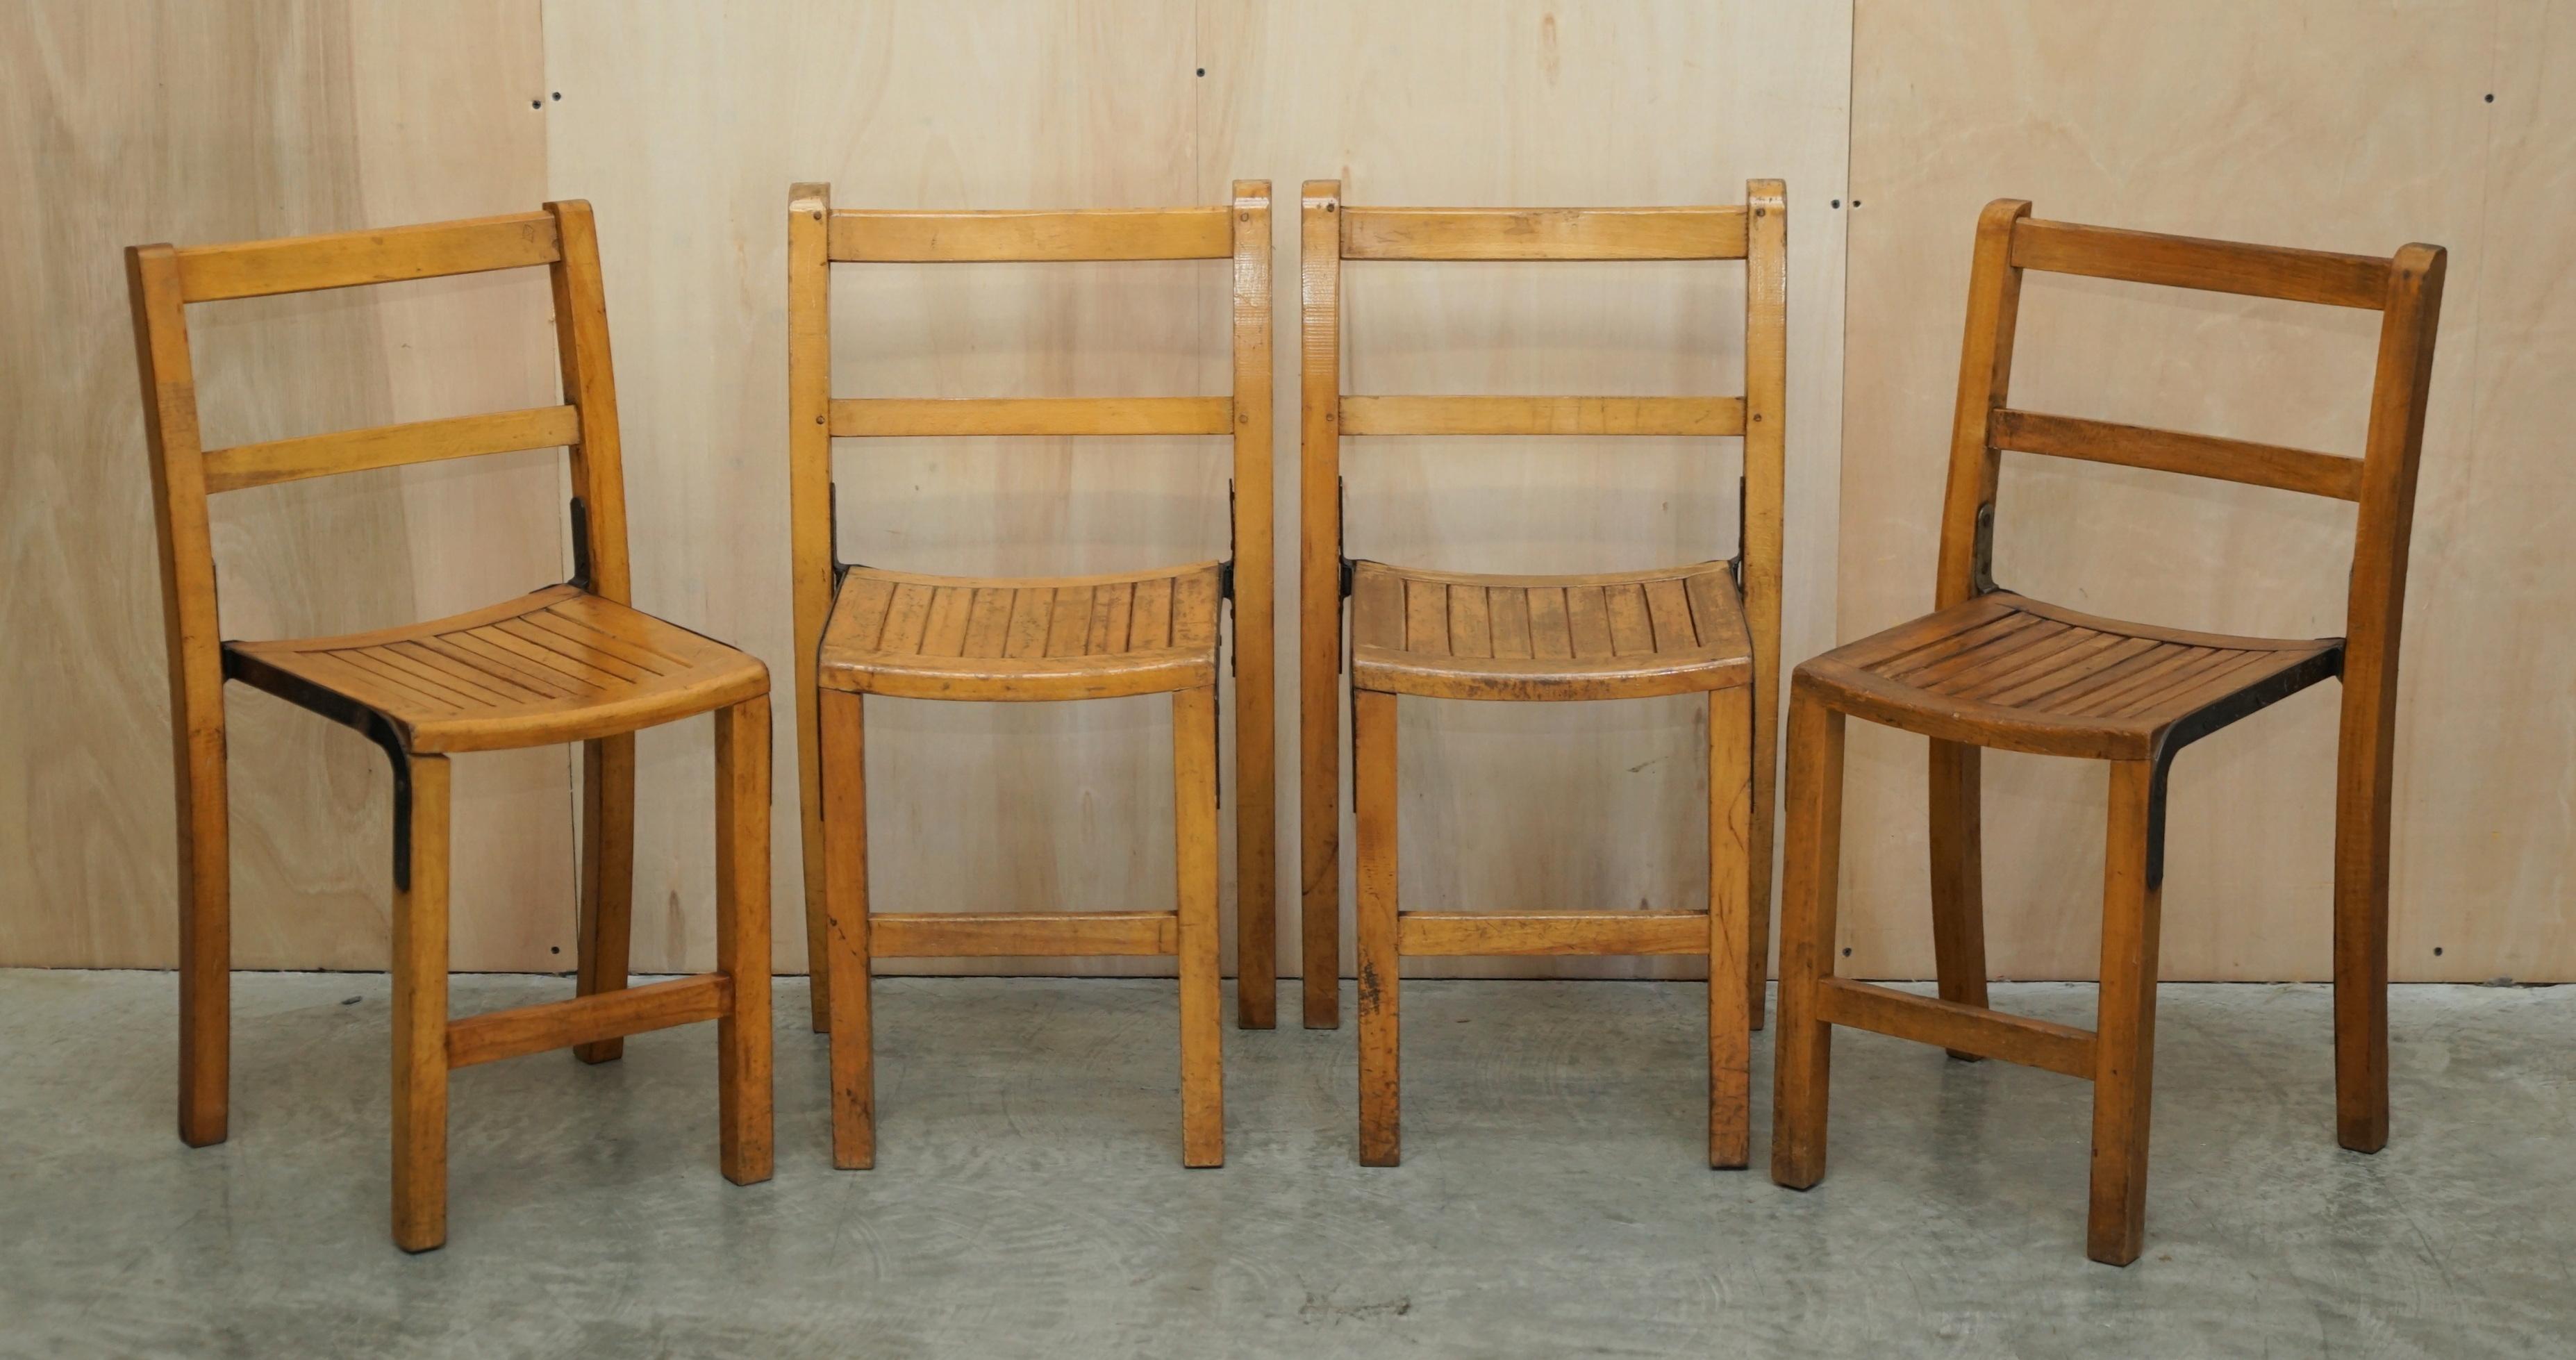 Nice Vintage Set of circa 1930's English Oak Stacking Chairs with Period Finish For Sale 1